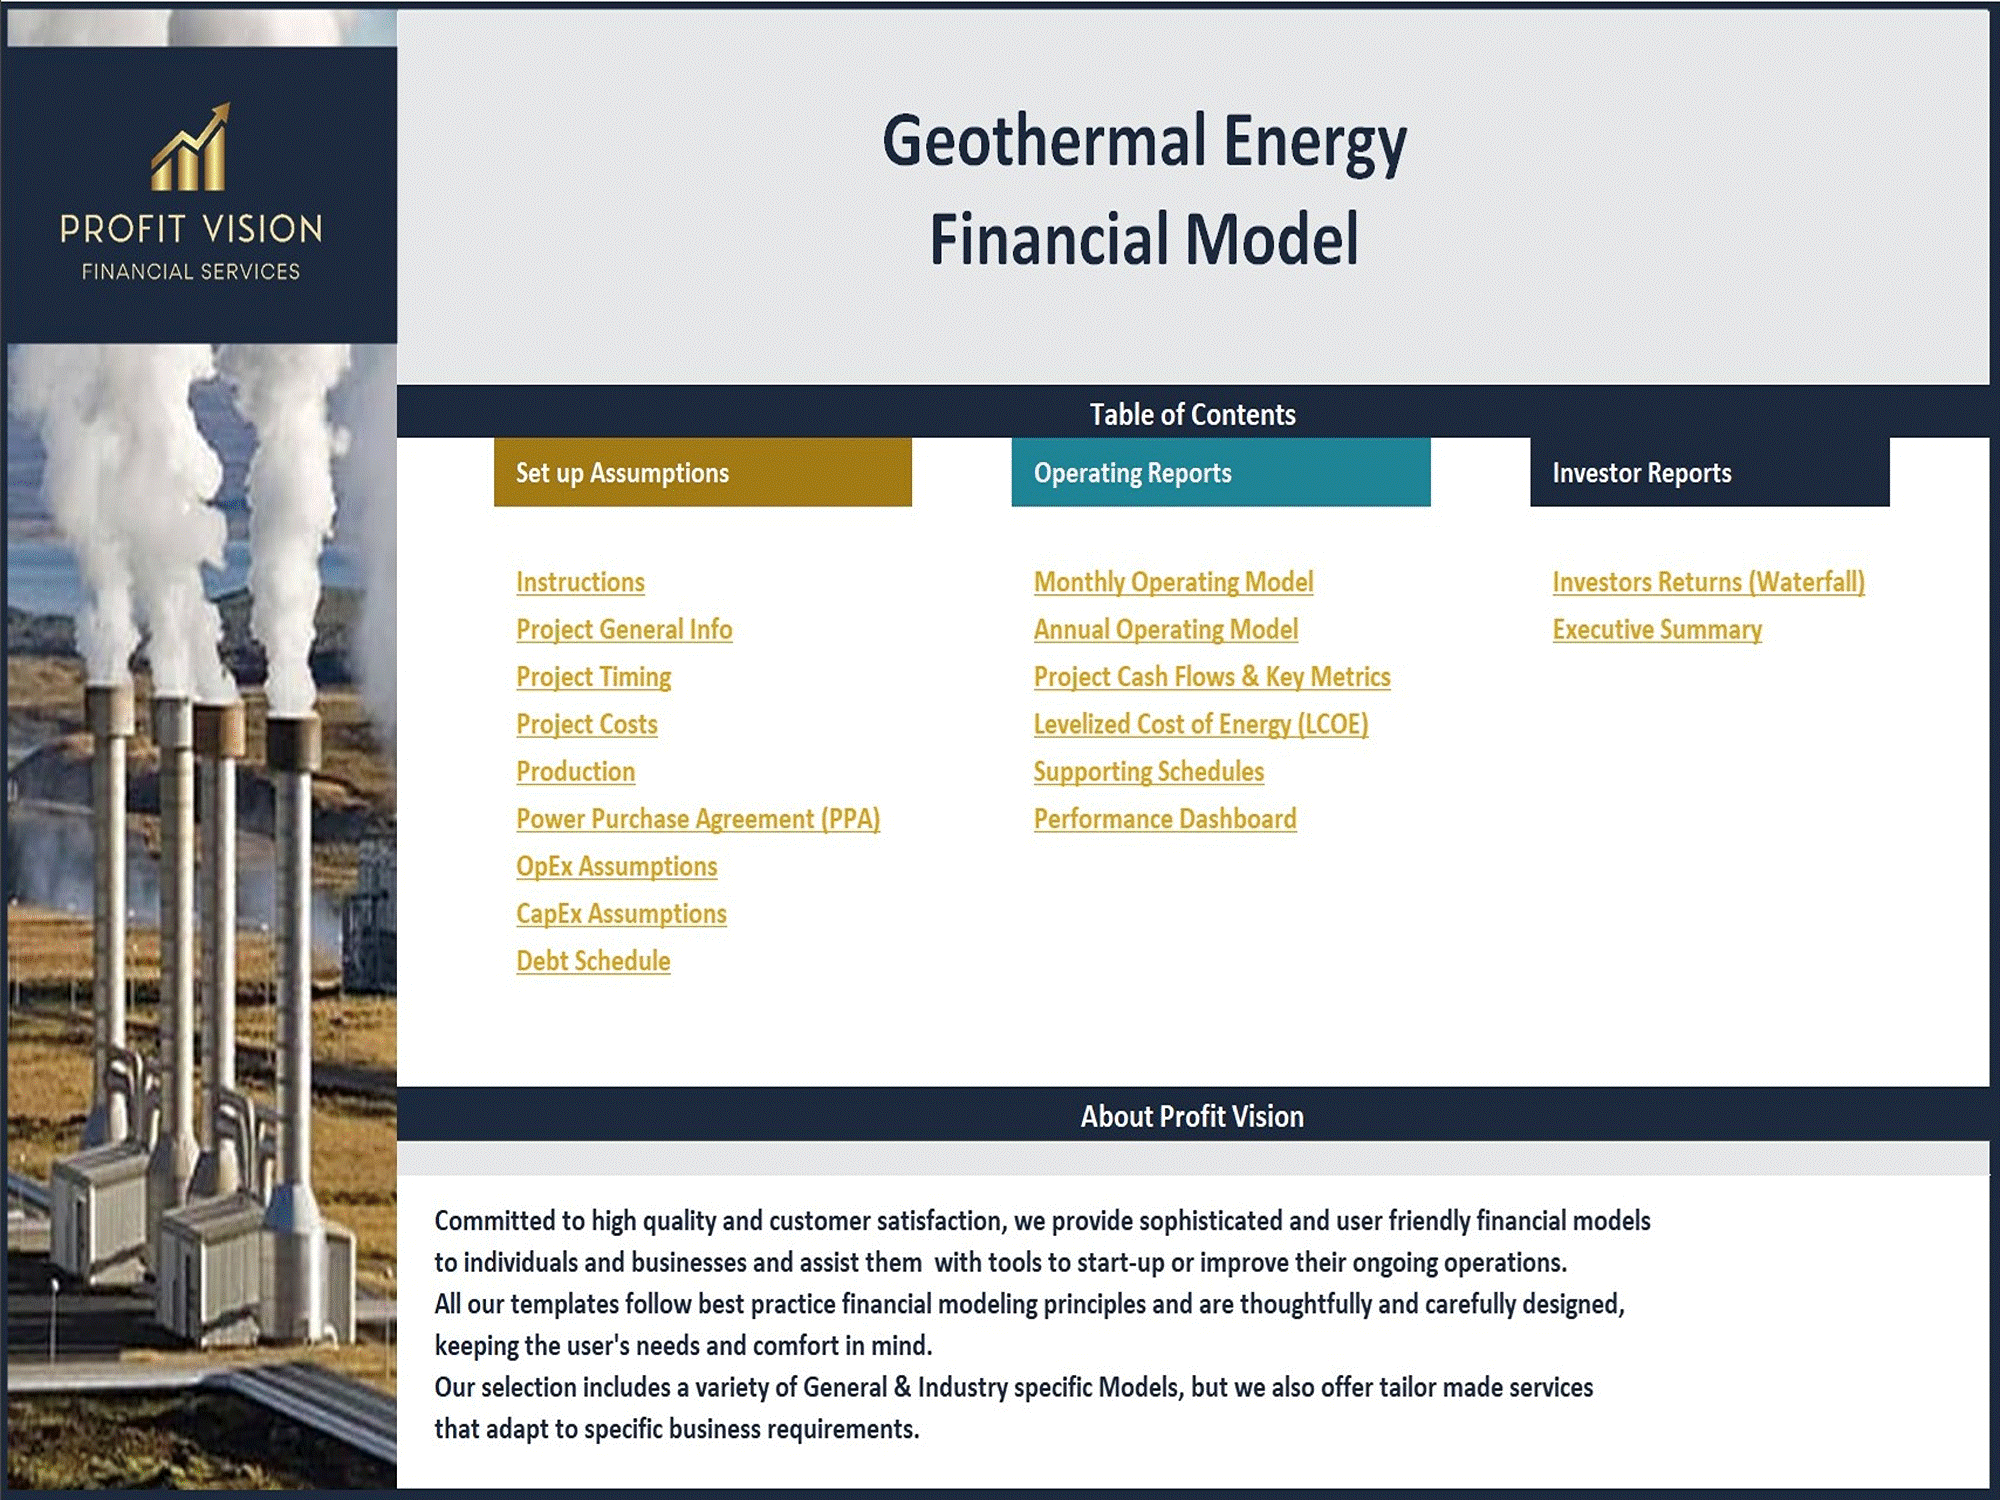 This is a partial preview of Geothermal Energy - Project Finance Model (Excel workbook (XLSX)). 